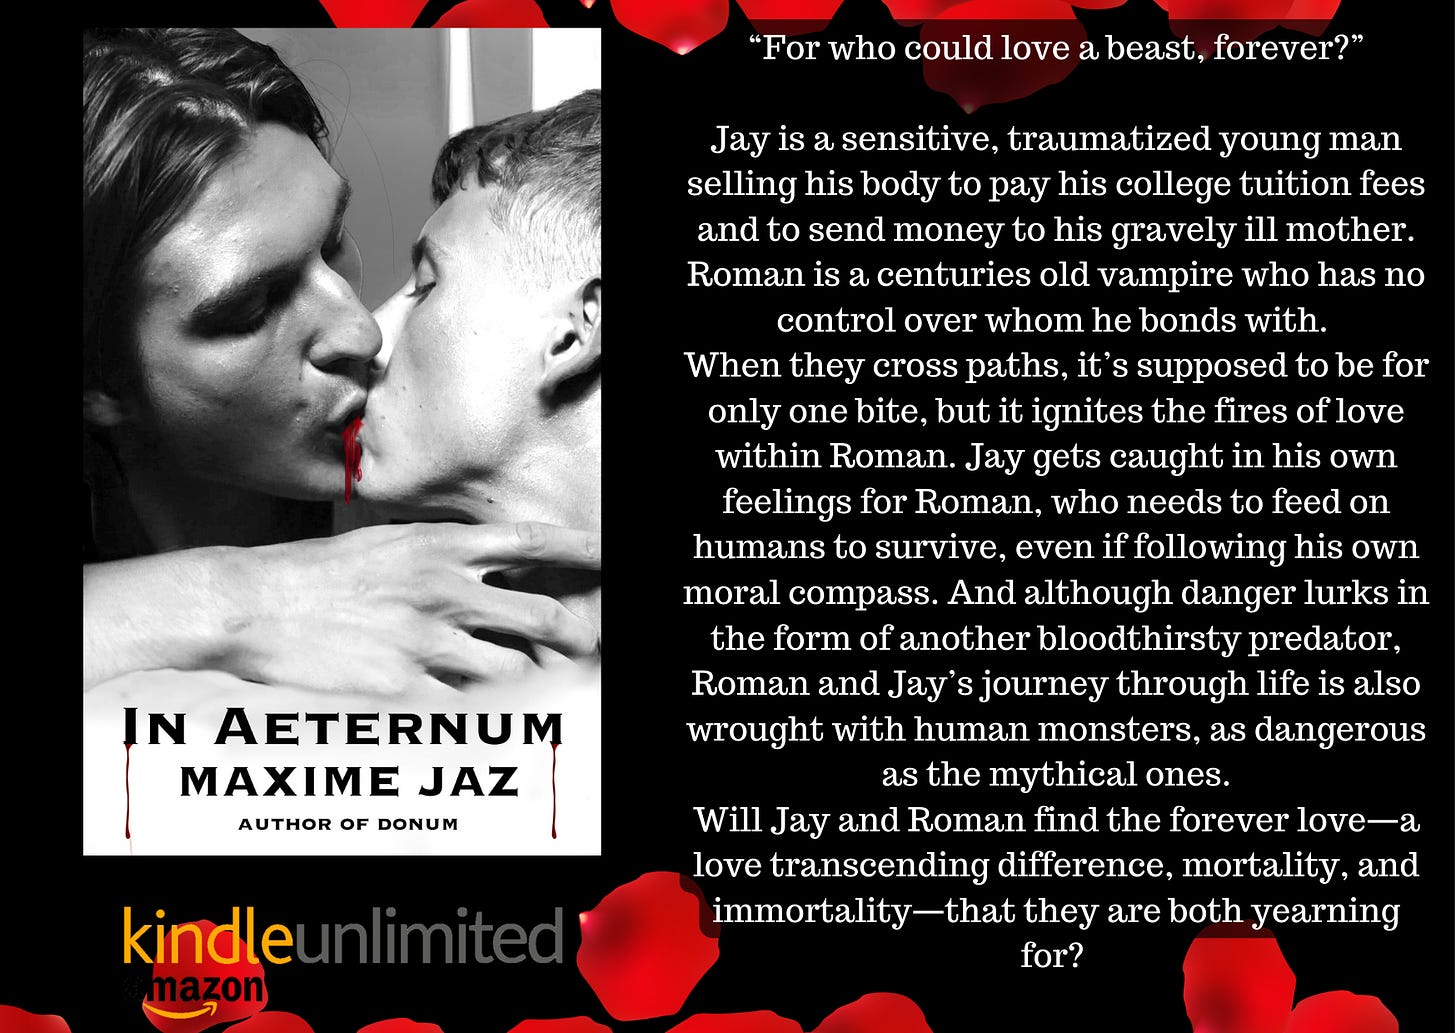 On black background with red rose petals frame top and bottom. Left the book's cover, greyscale photo of two men kissing, blood between their lips. In Aeternum Maxime Jaz Author of Donum. Blurb “For who could love a beast, forever?”Jay is a sensitive, traumatized young man selling his body to pay his college tuition fees and to send money to his gravely ill mother.Roman is a centuries old vampire who has no control over whom he bonds with. When they cross paths, it’s supposed to be for only one bite, but it ignites the fires of love within Roman. Jay gets caught in his own feelings for Roman, who needs to feed on humans to survive, even if following his own moral compass. And although danger lurks in the form of another bloodthirsty predator, Roman and Jay’s journey through life is also wrought with human monsters, as dangerous as the mythical ones.Will Jay and Roman find the forever love—a love transcending difference, mortality, and immortality that they're both yearning for?